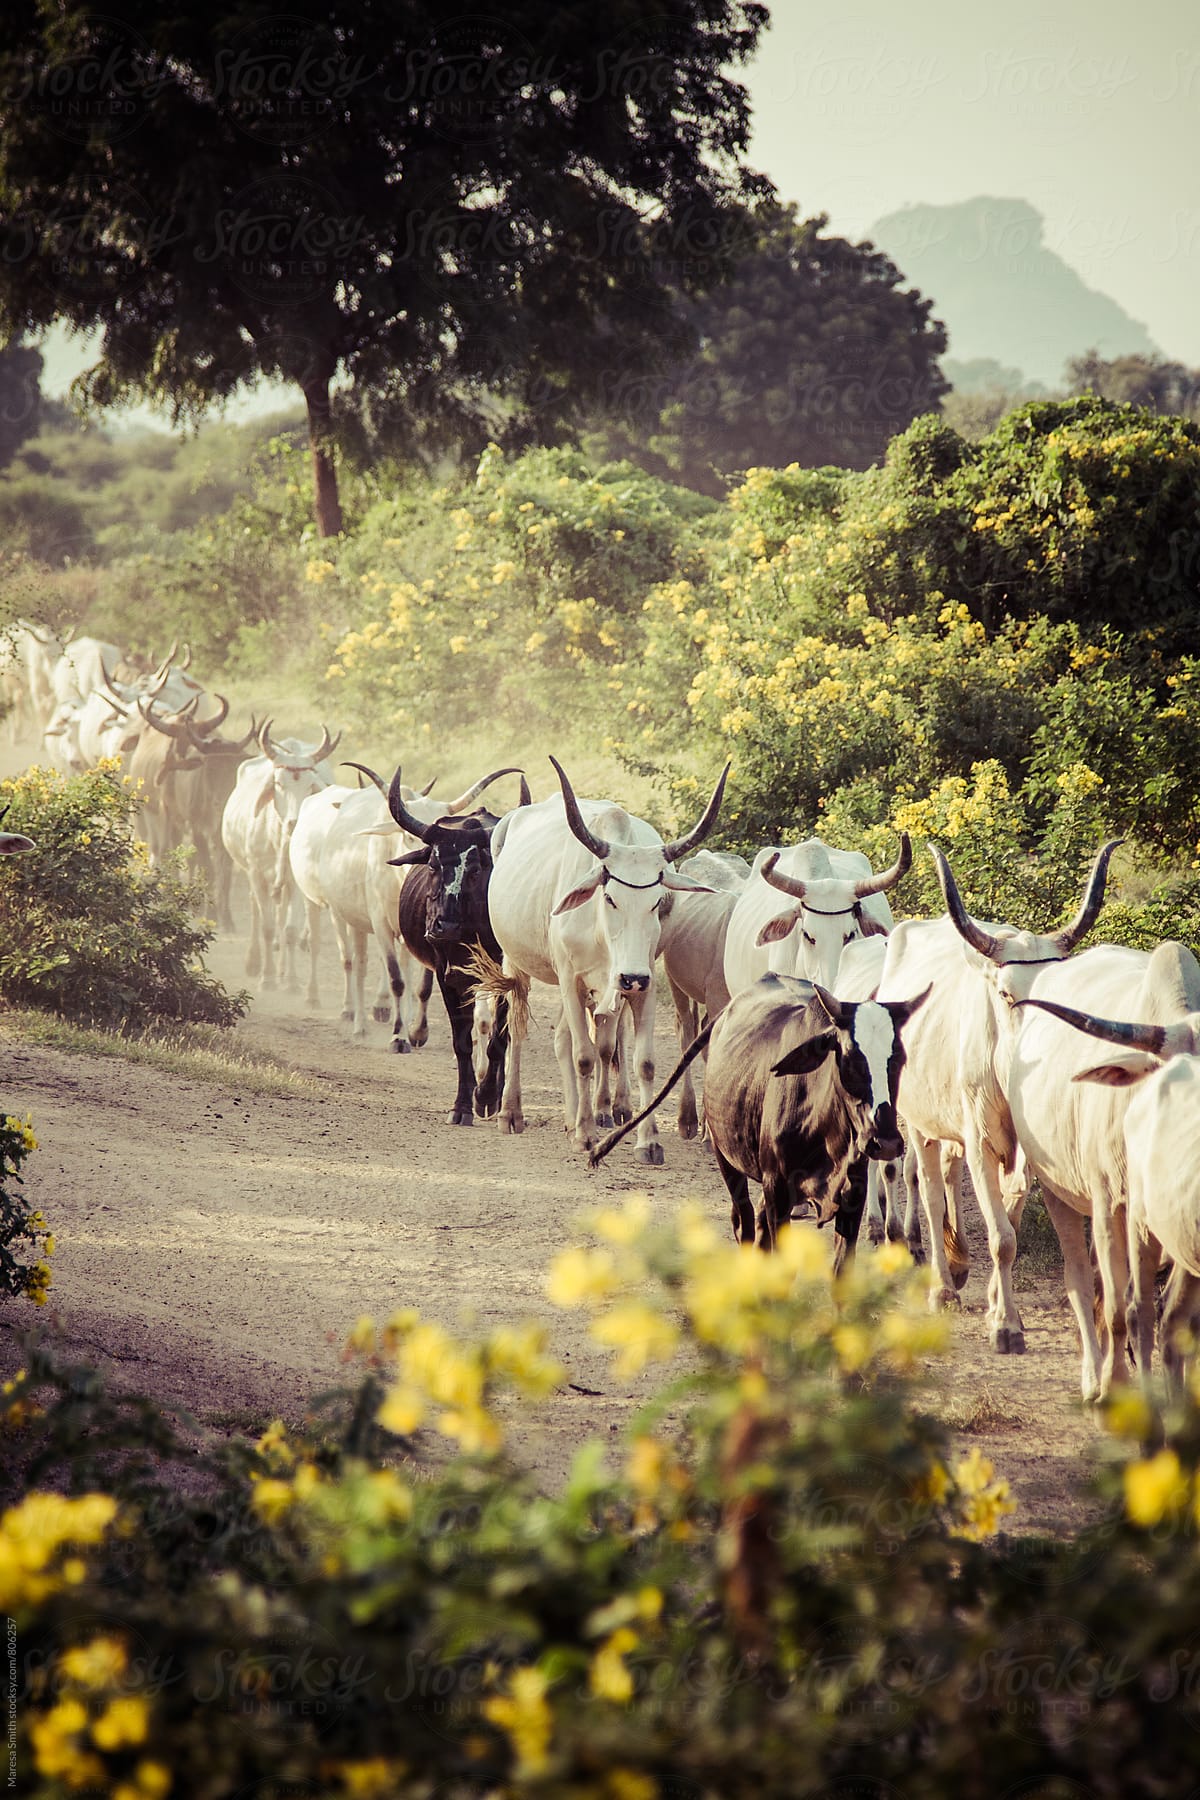 A herd of cows walking towards the camera in the Rajasthani wilderness